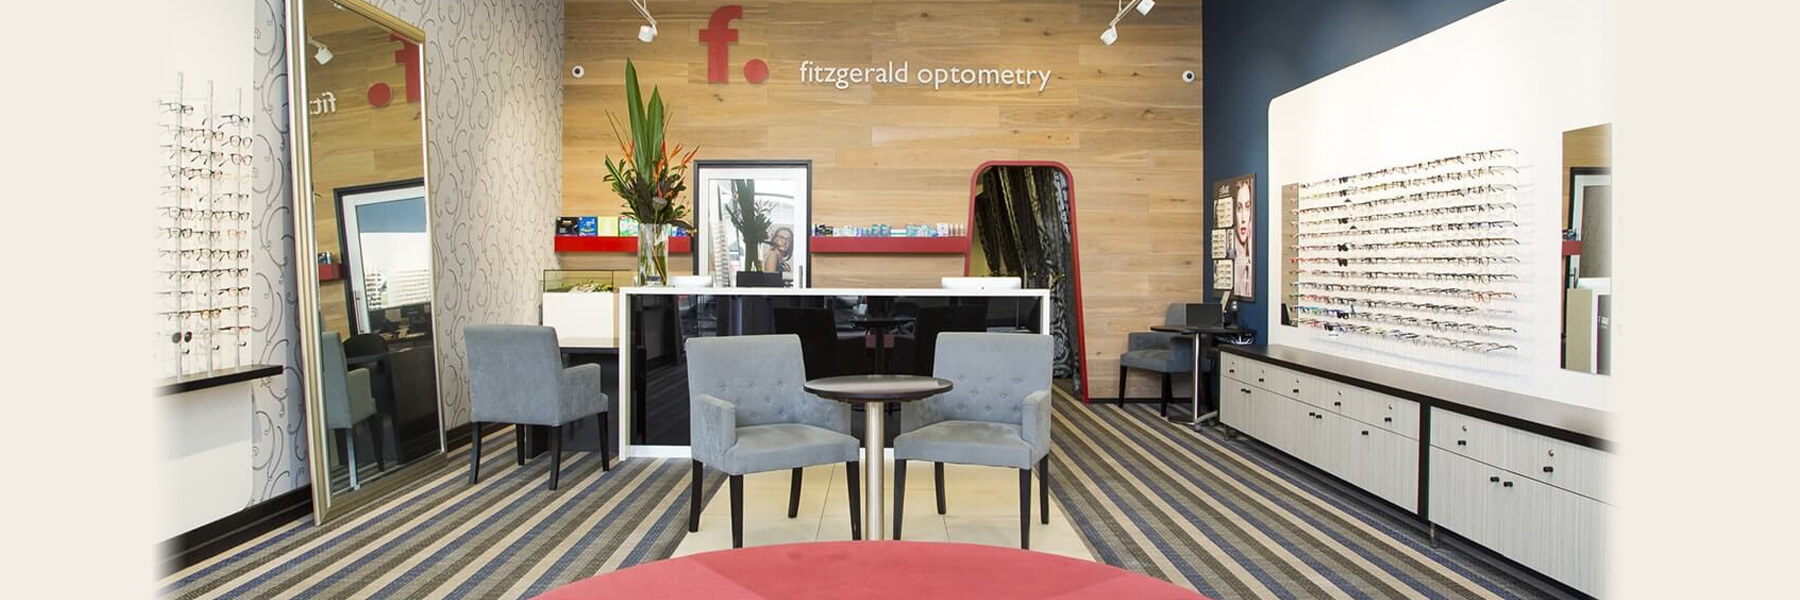 Images Fitzgerald Optometry